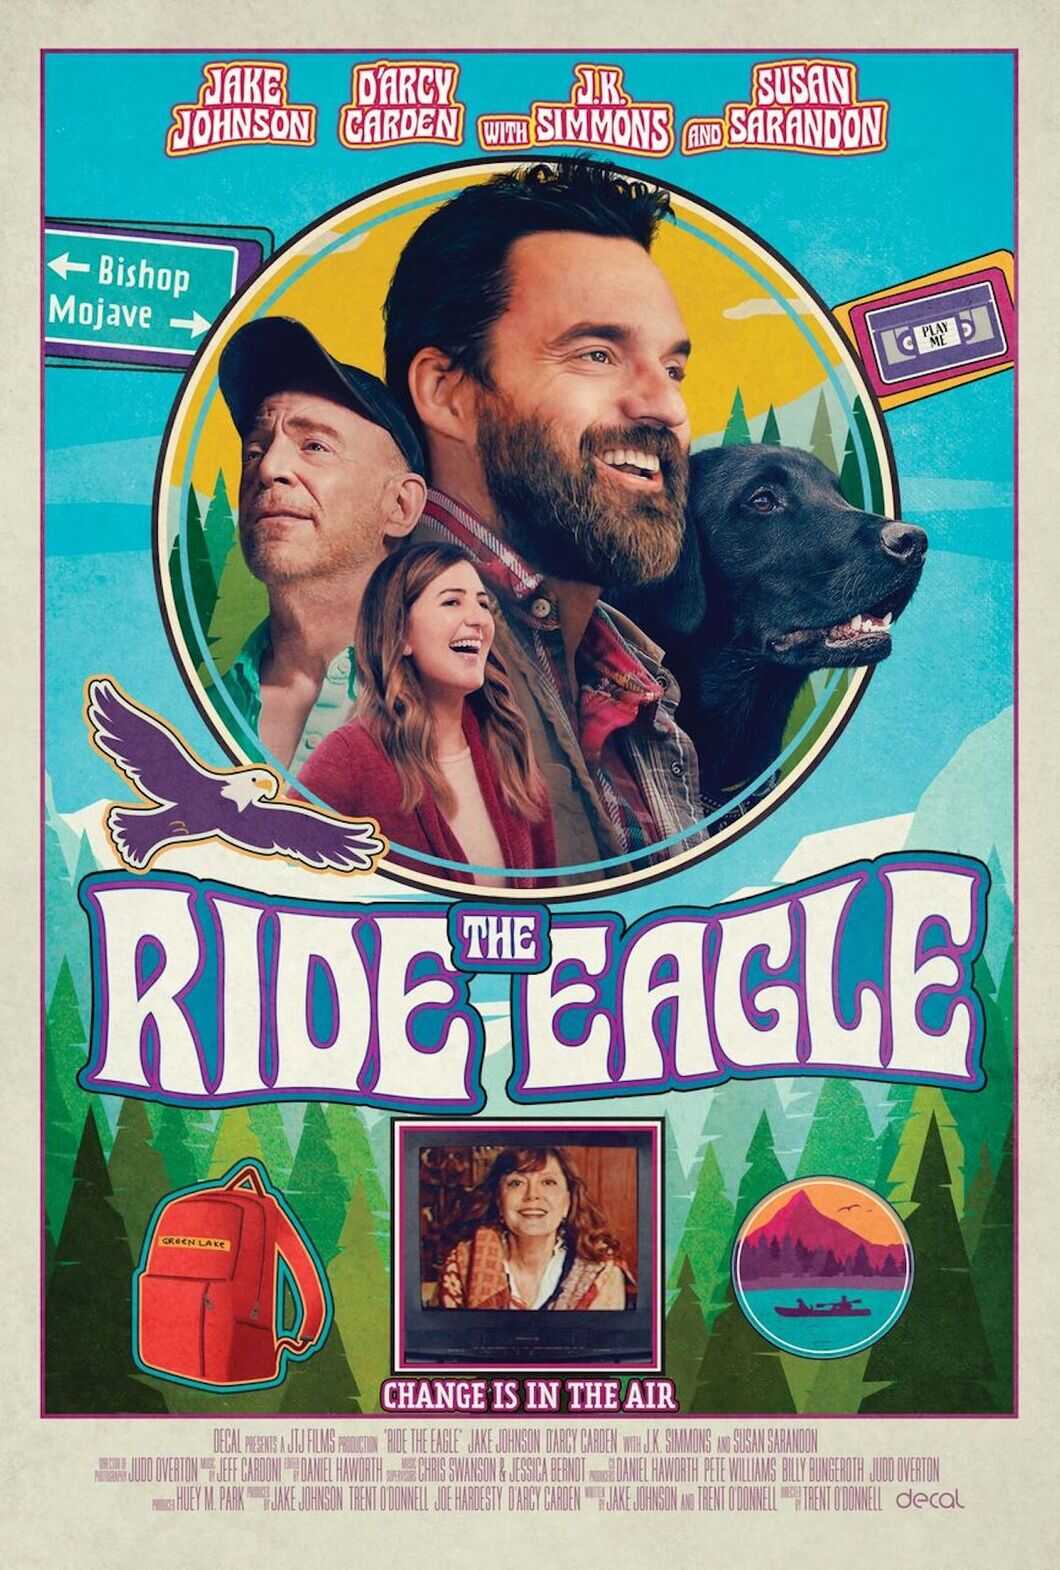 Theatrical poster for Ride The Eagle (2021) directed by Trent O'Donnell and starring Jake Johnson, Susan Sarandon, and J.K. Simmons.